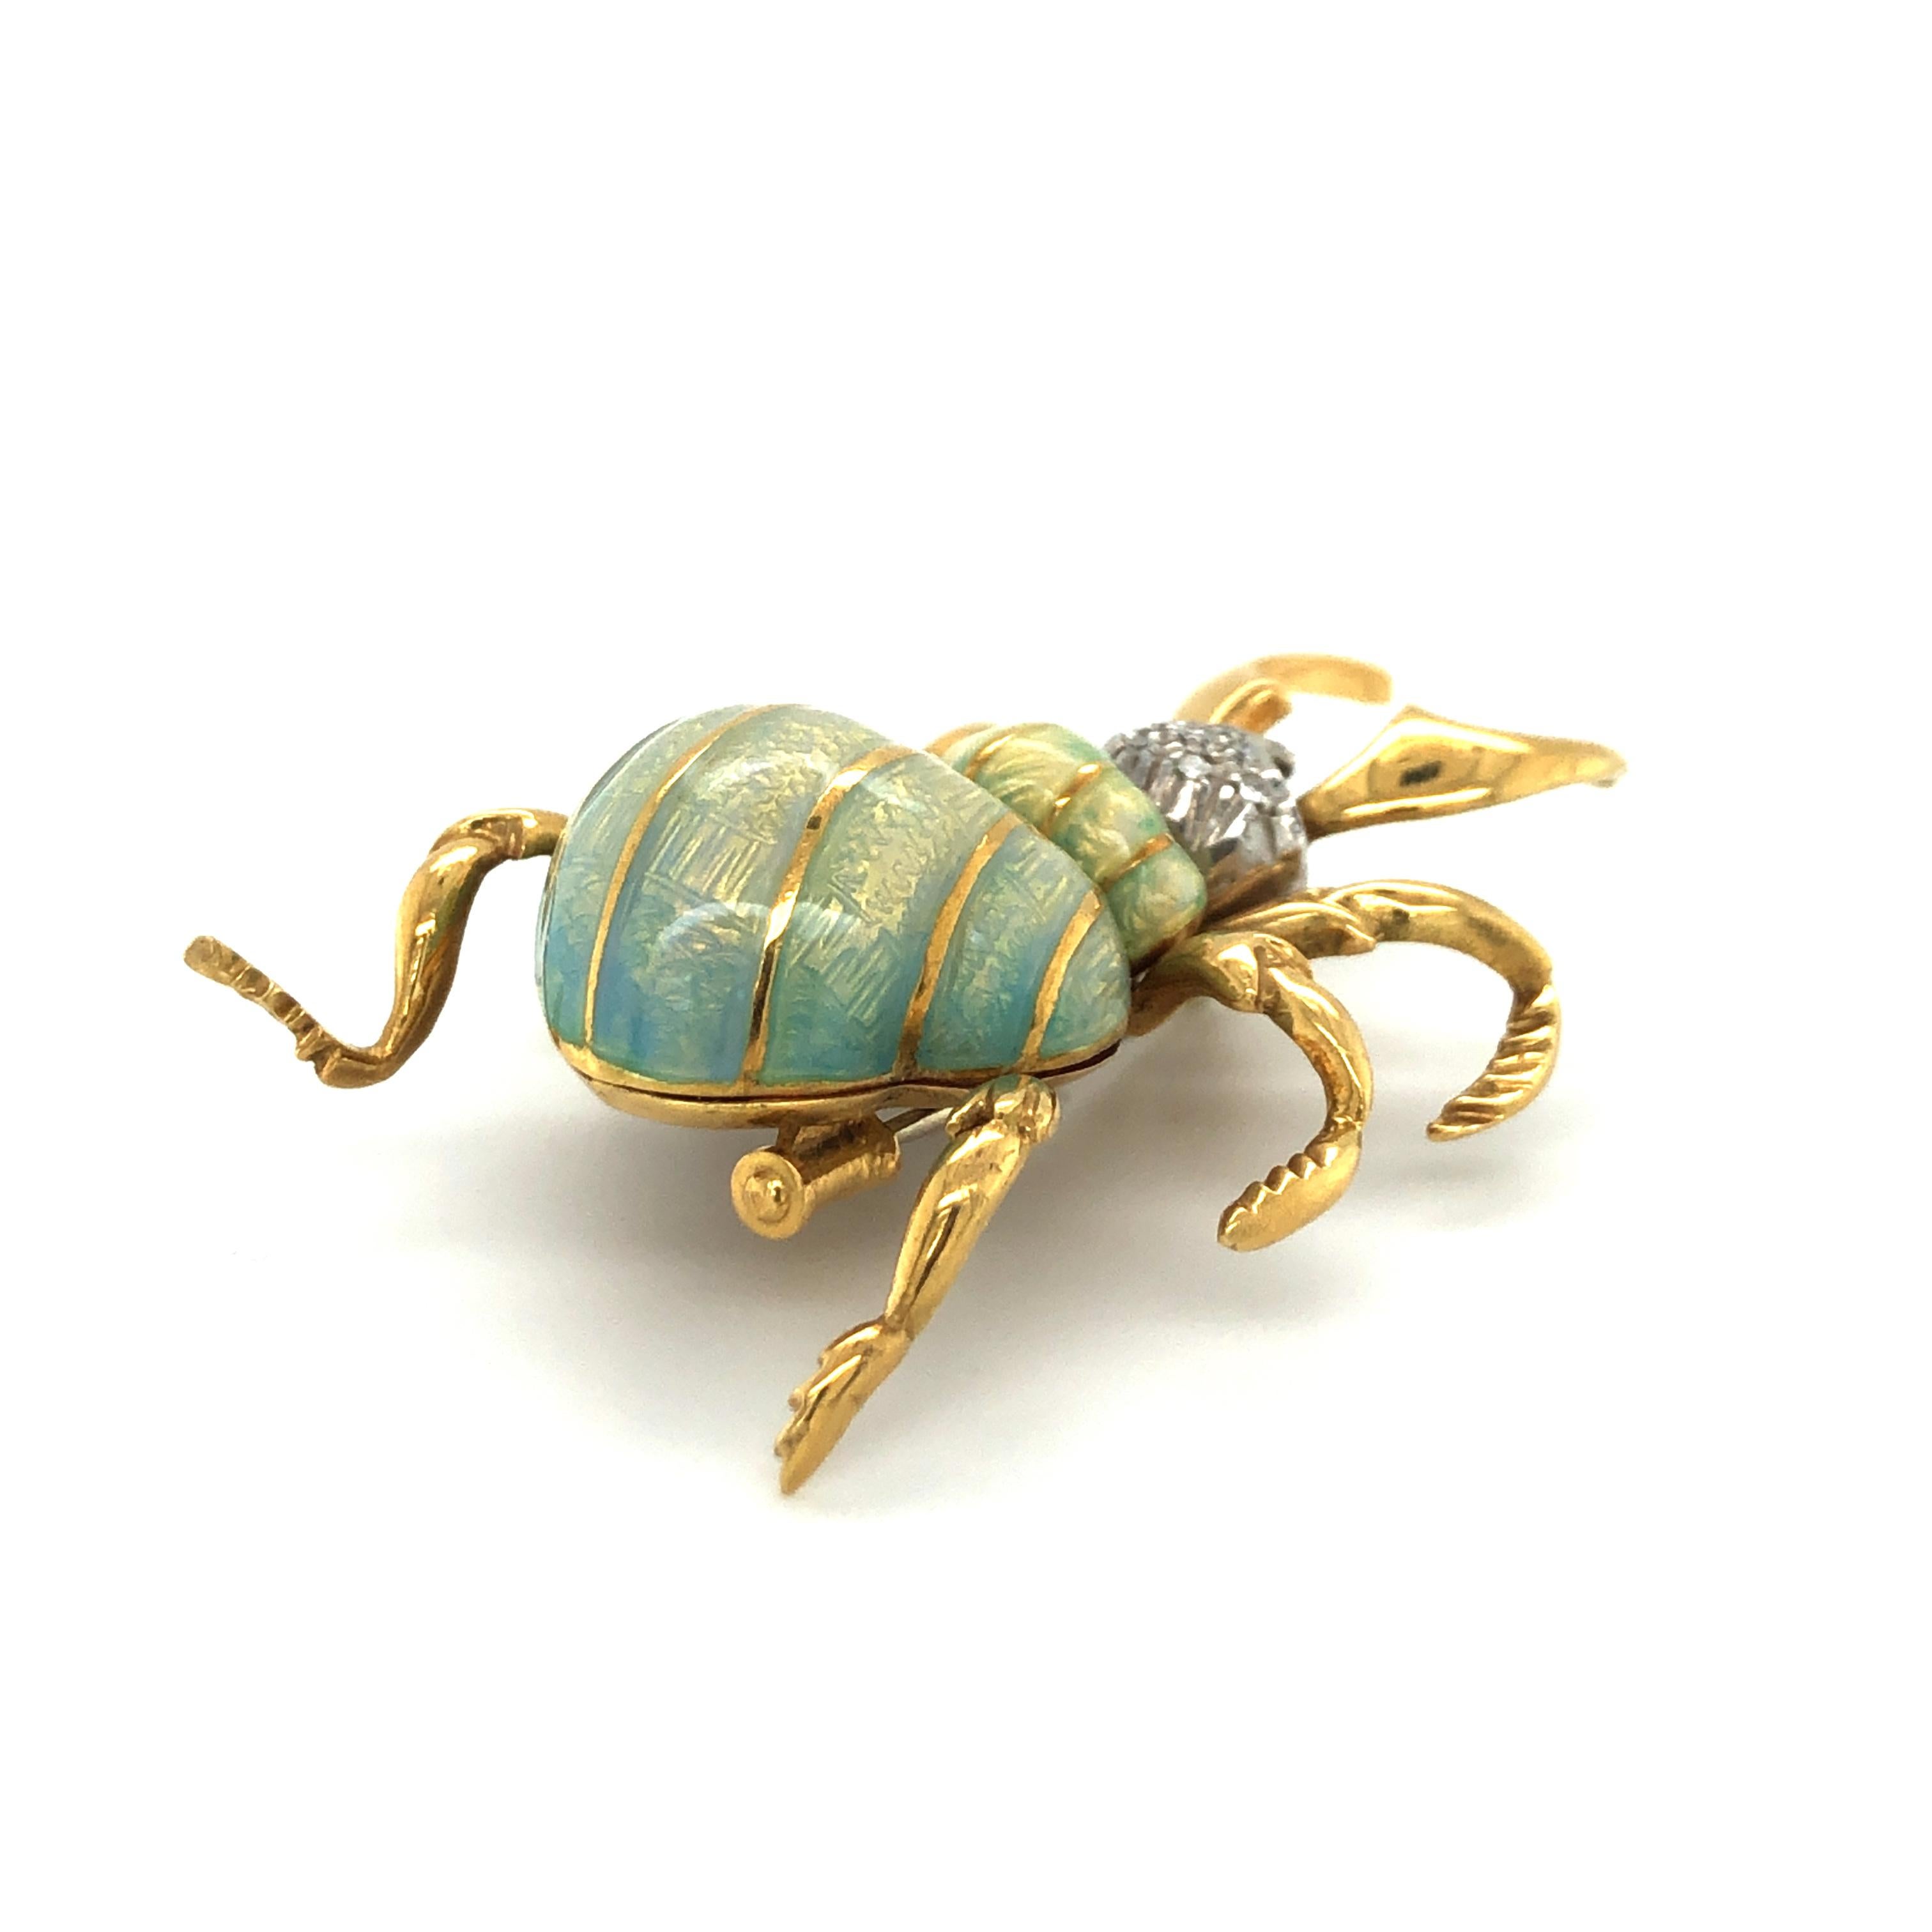 Stunning Enamel and Diamond Beetle Brooch in 18 Karat Yellow and White Gold 2